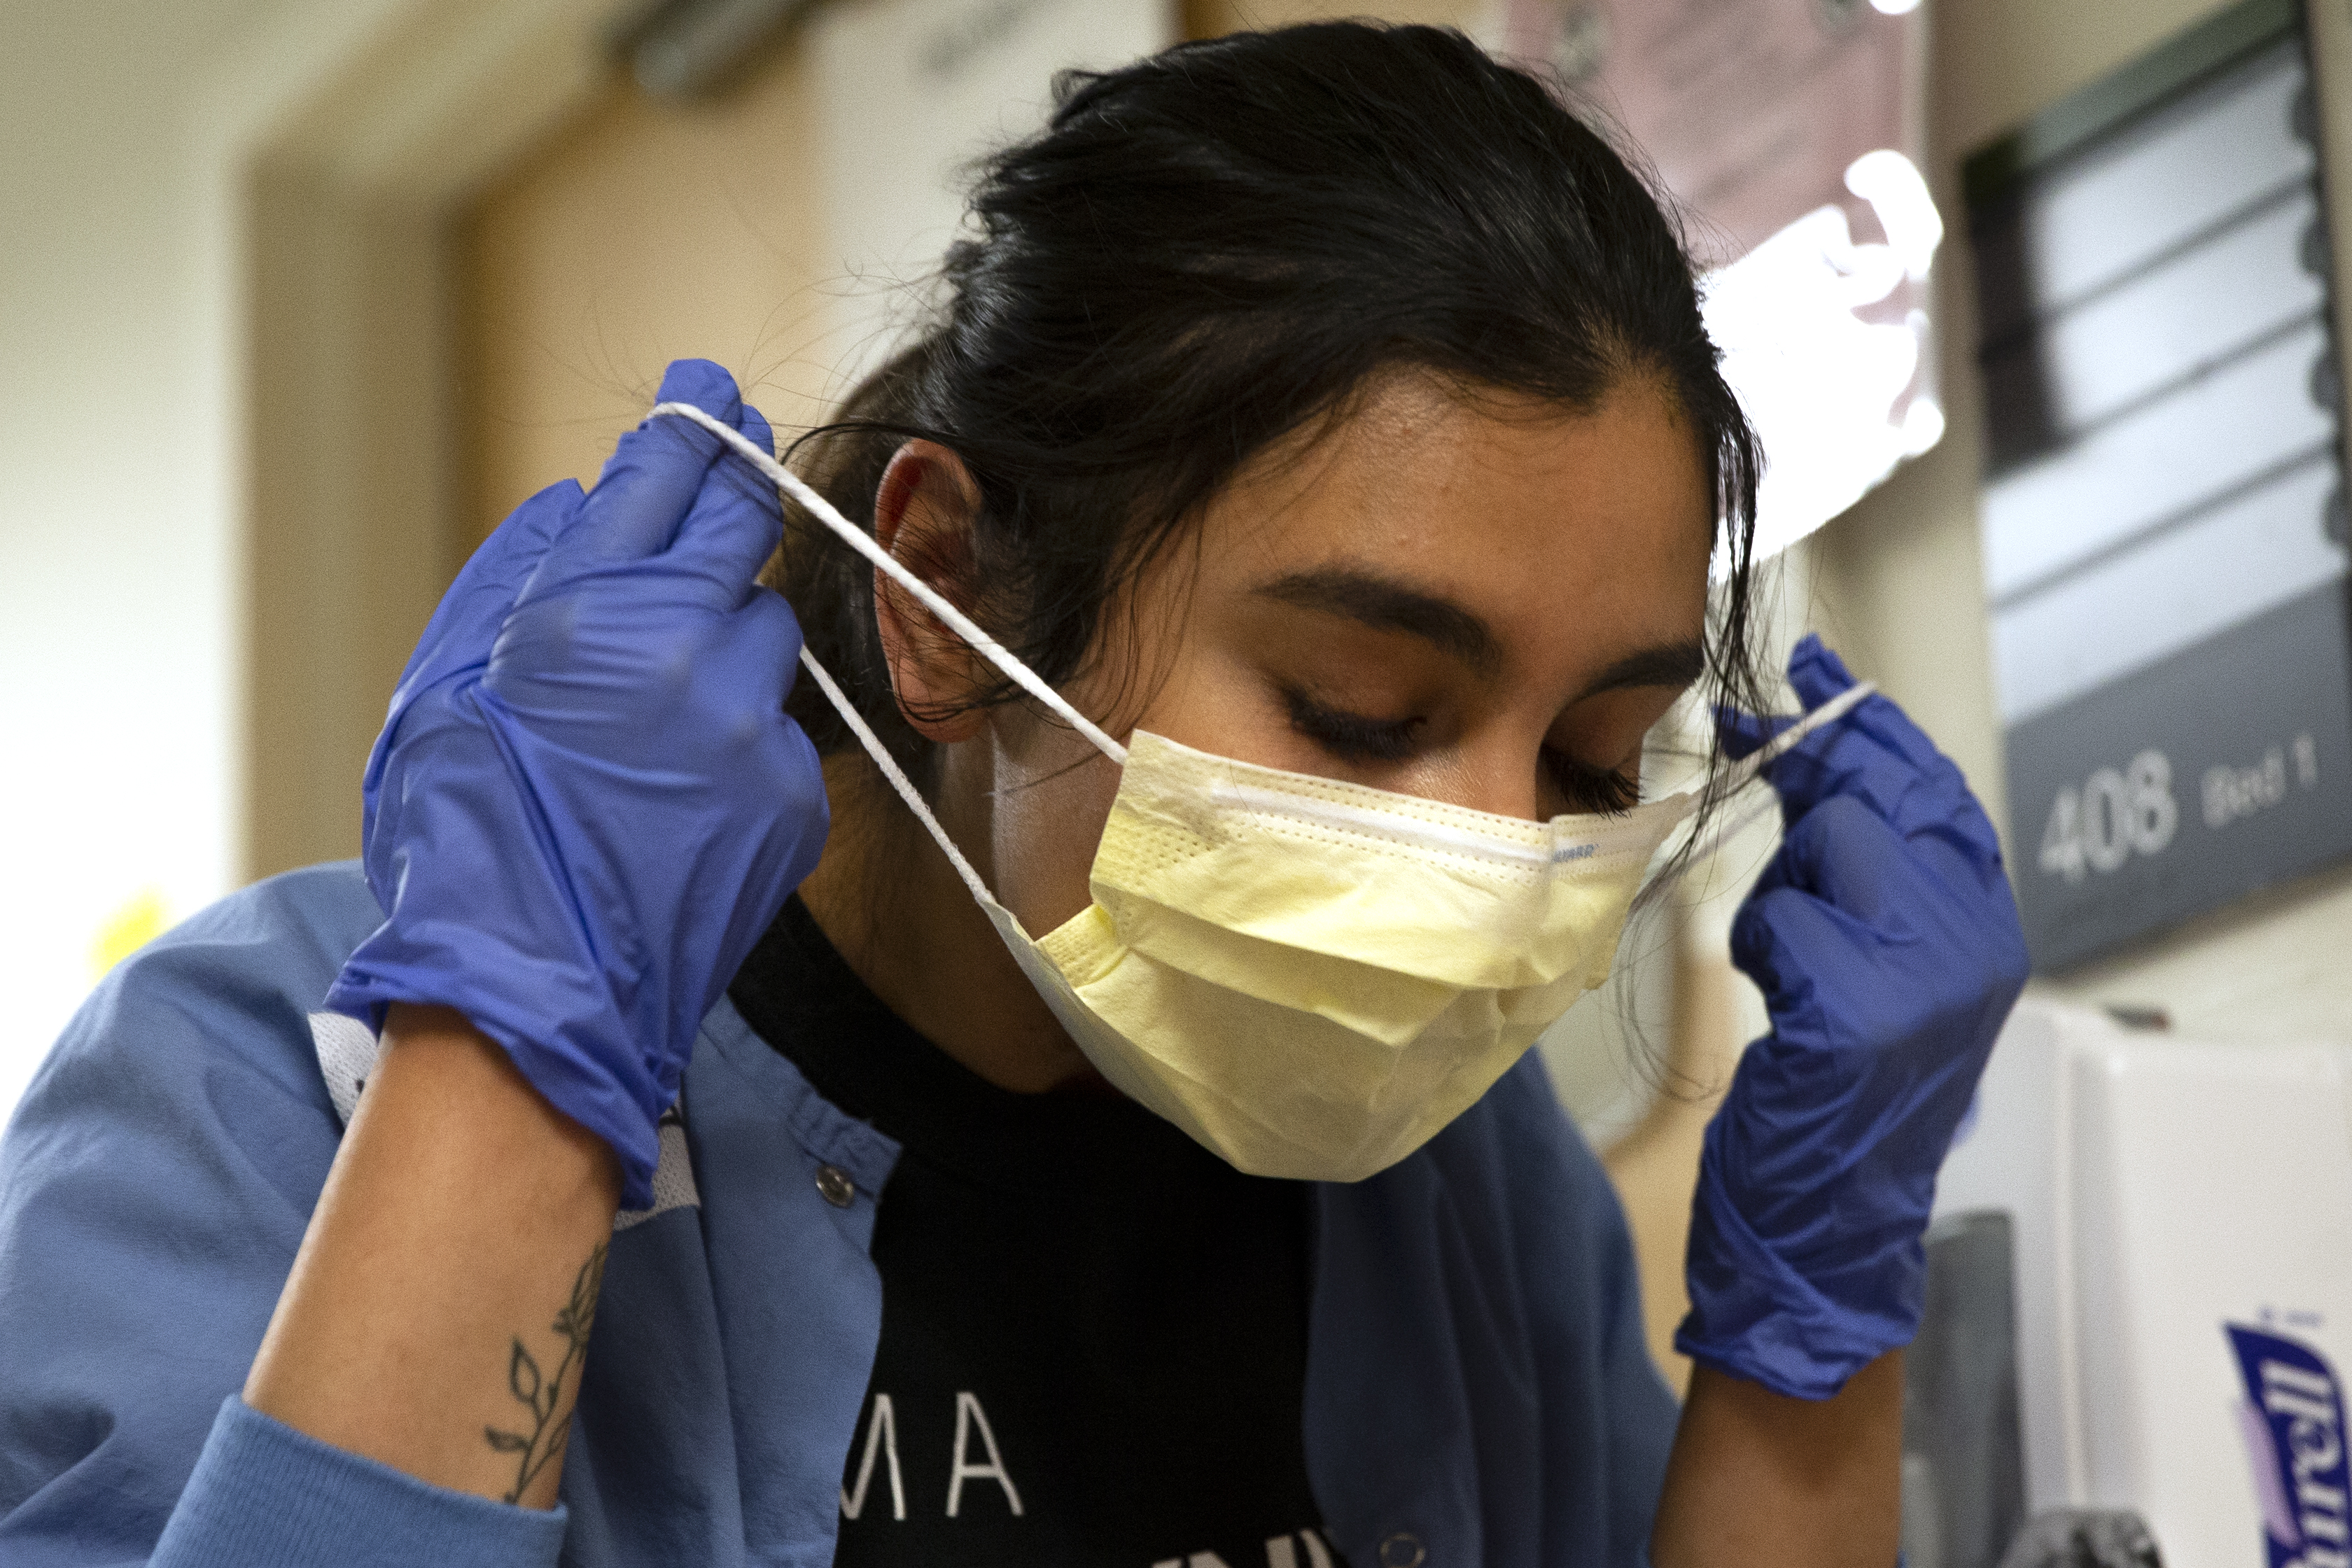 Los Angeles has reinstated mask requirements for staff and visitors to health care facilities.